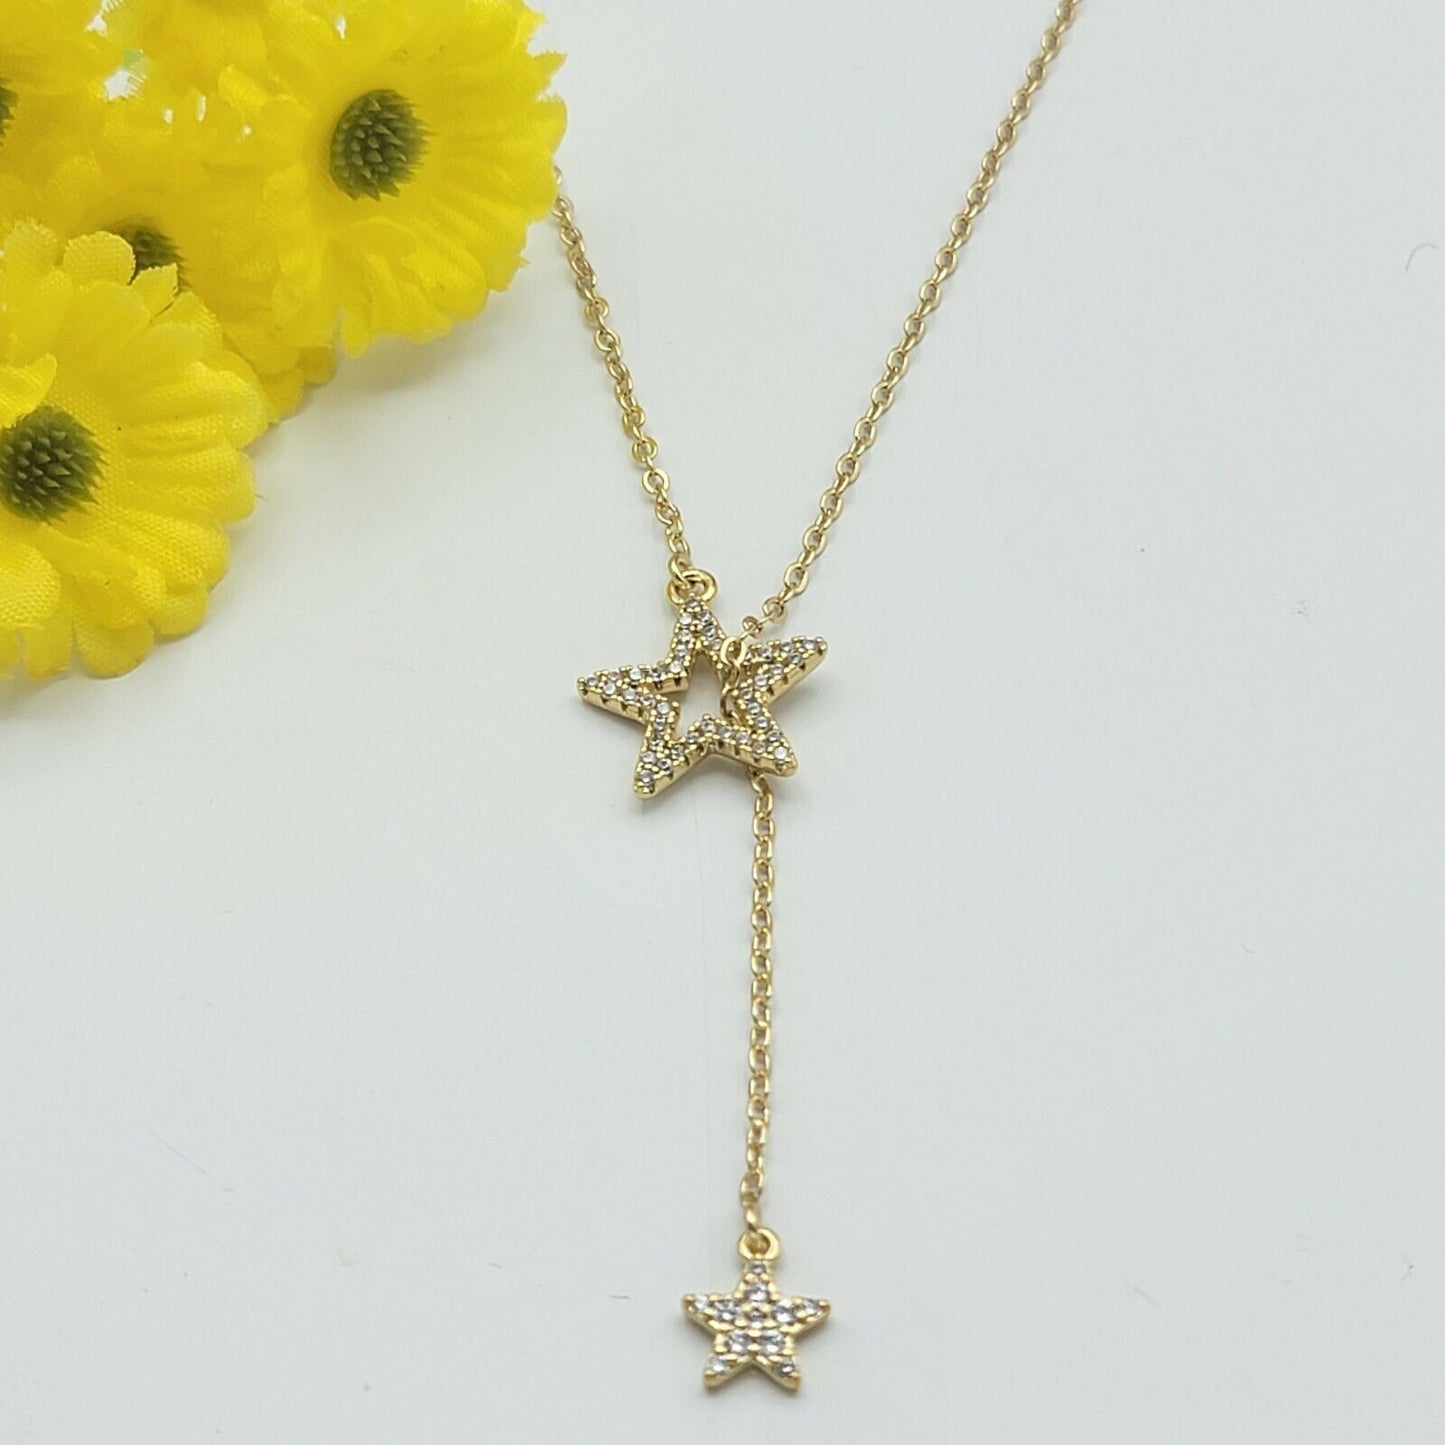 Necklaces - 14K Gold Plated. Double CZ STAR Pull Through Y Adjustable Necklace